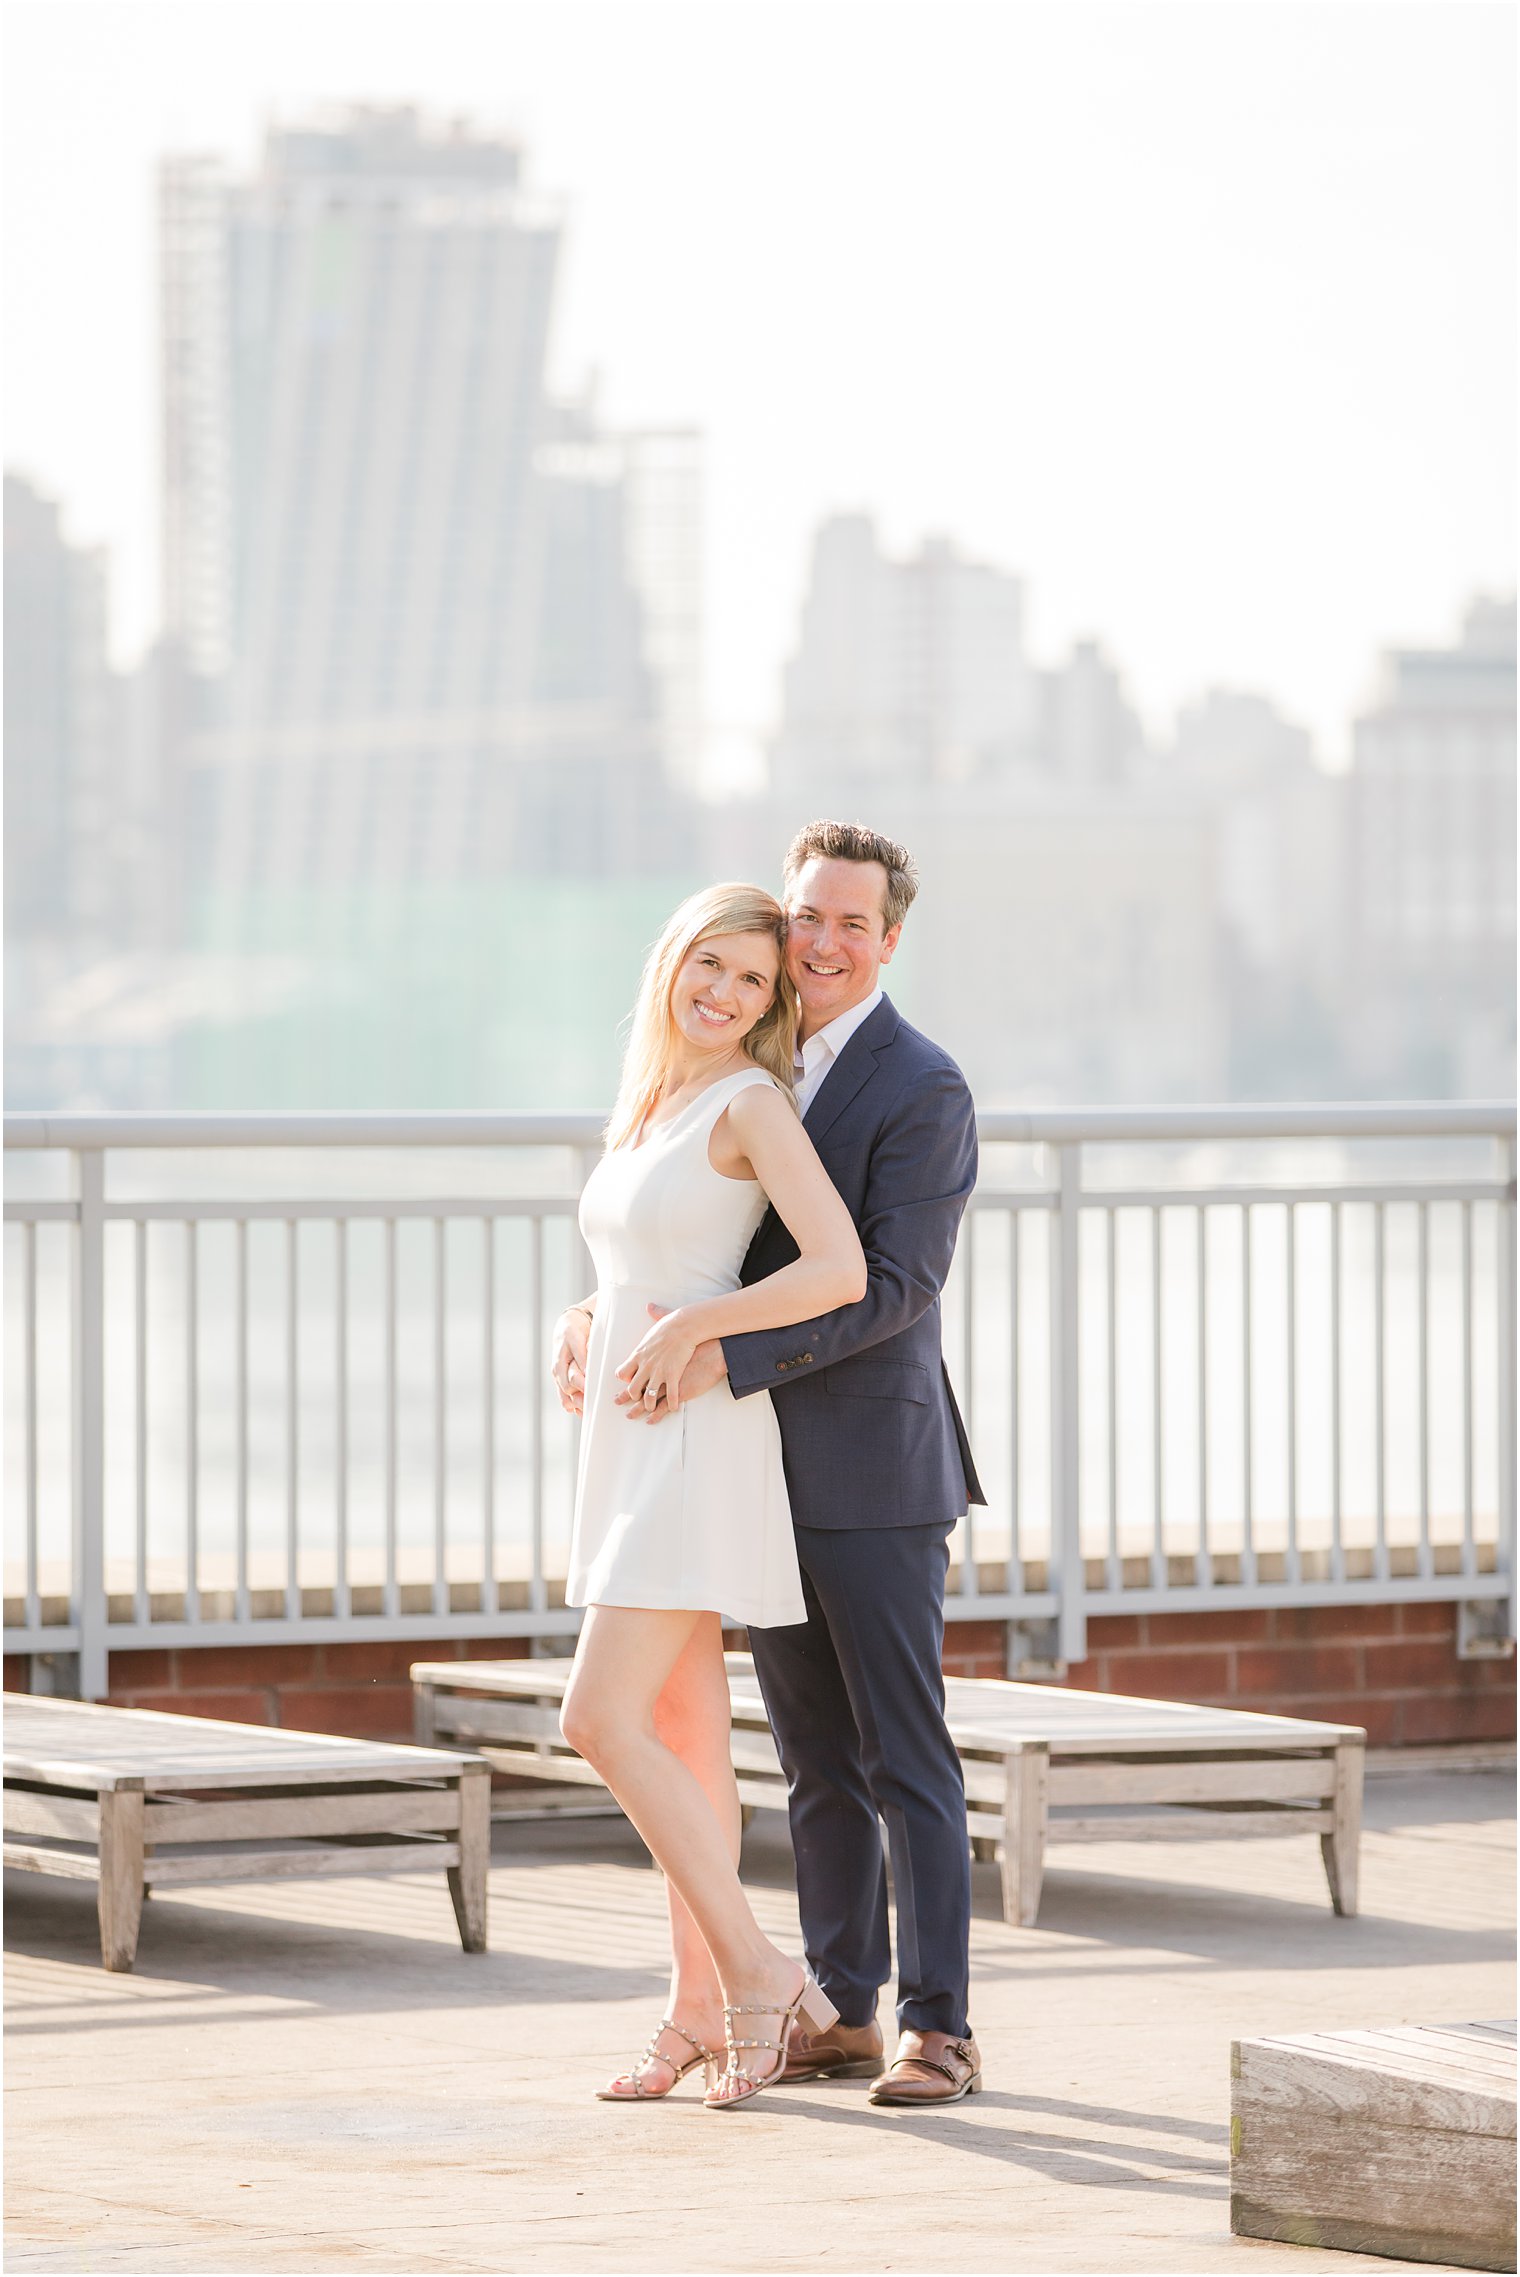 Classic engagement pose | Hoboken Rooftop Engagement by Idalia Photography